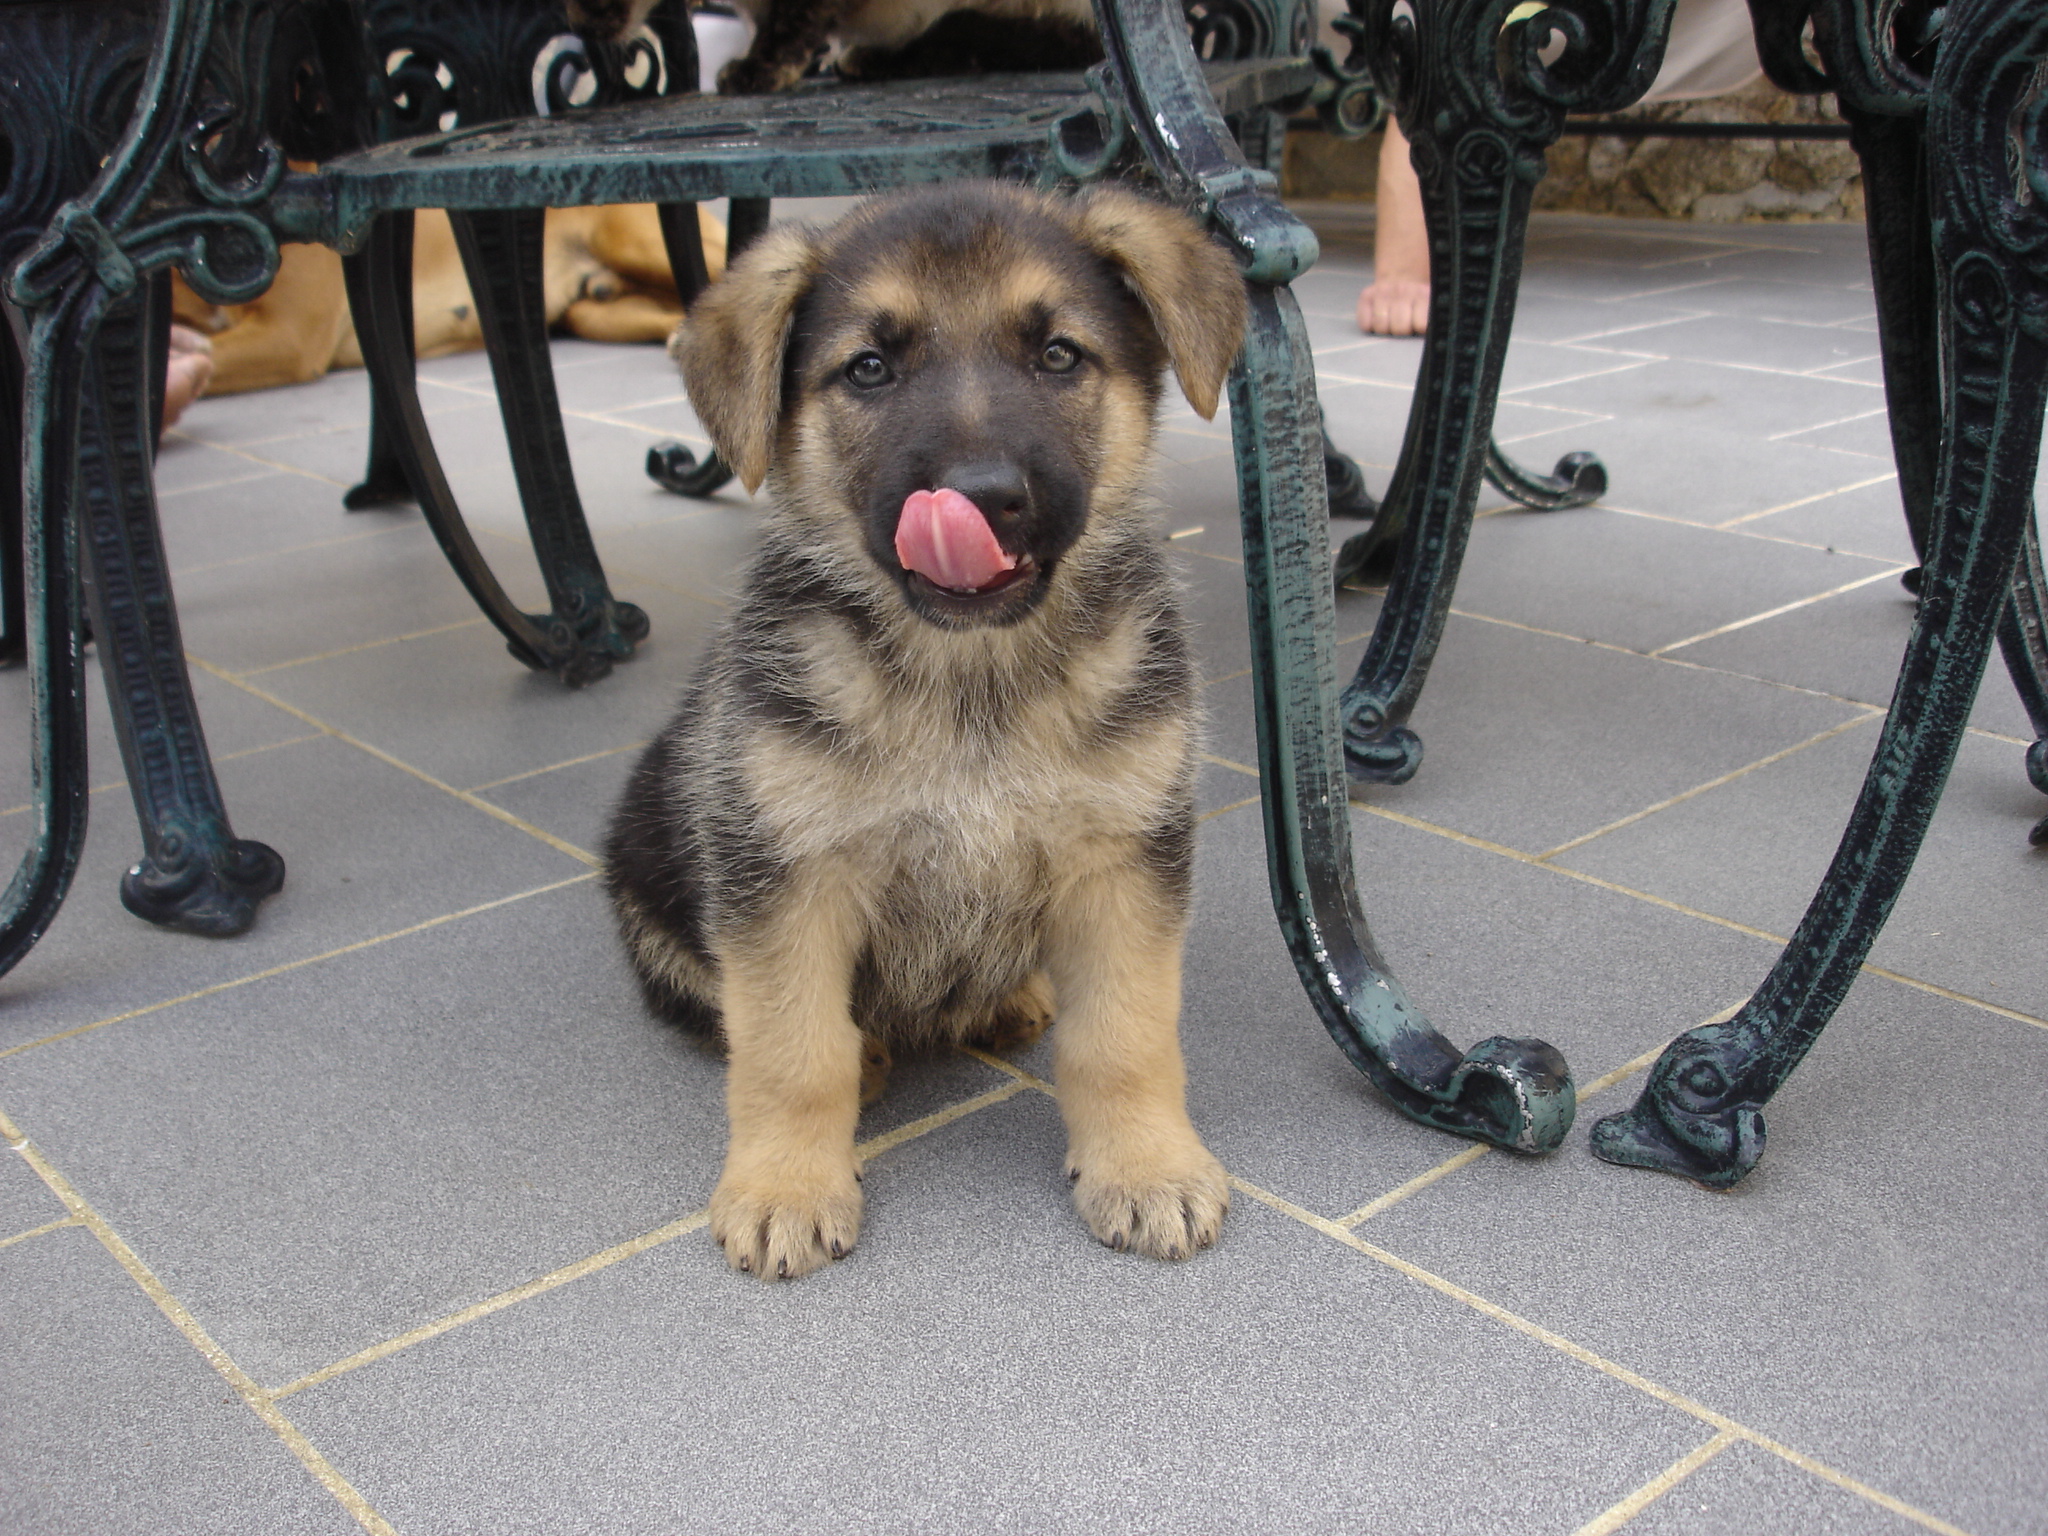 a puppy sitting under a table with his tongue out